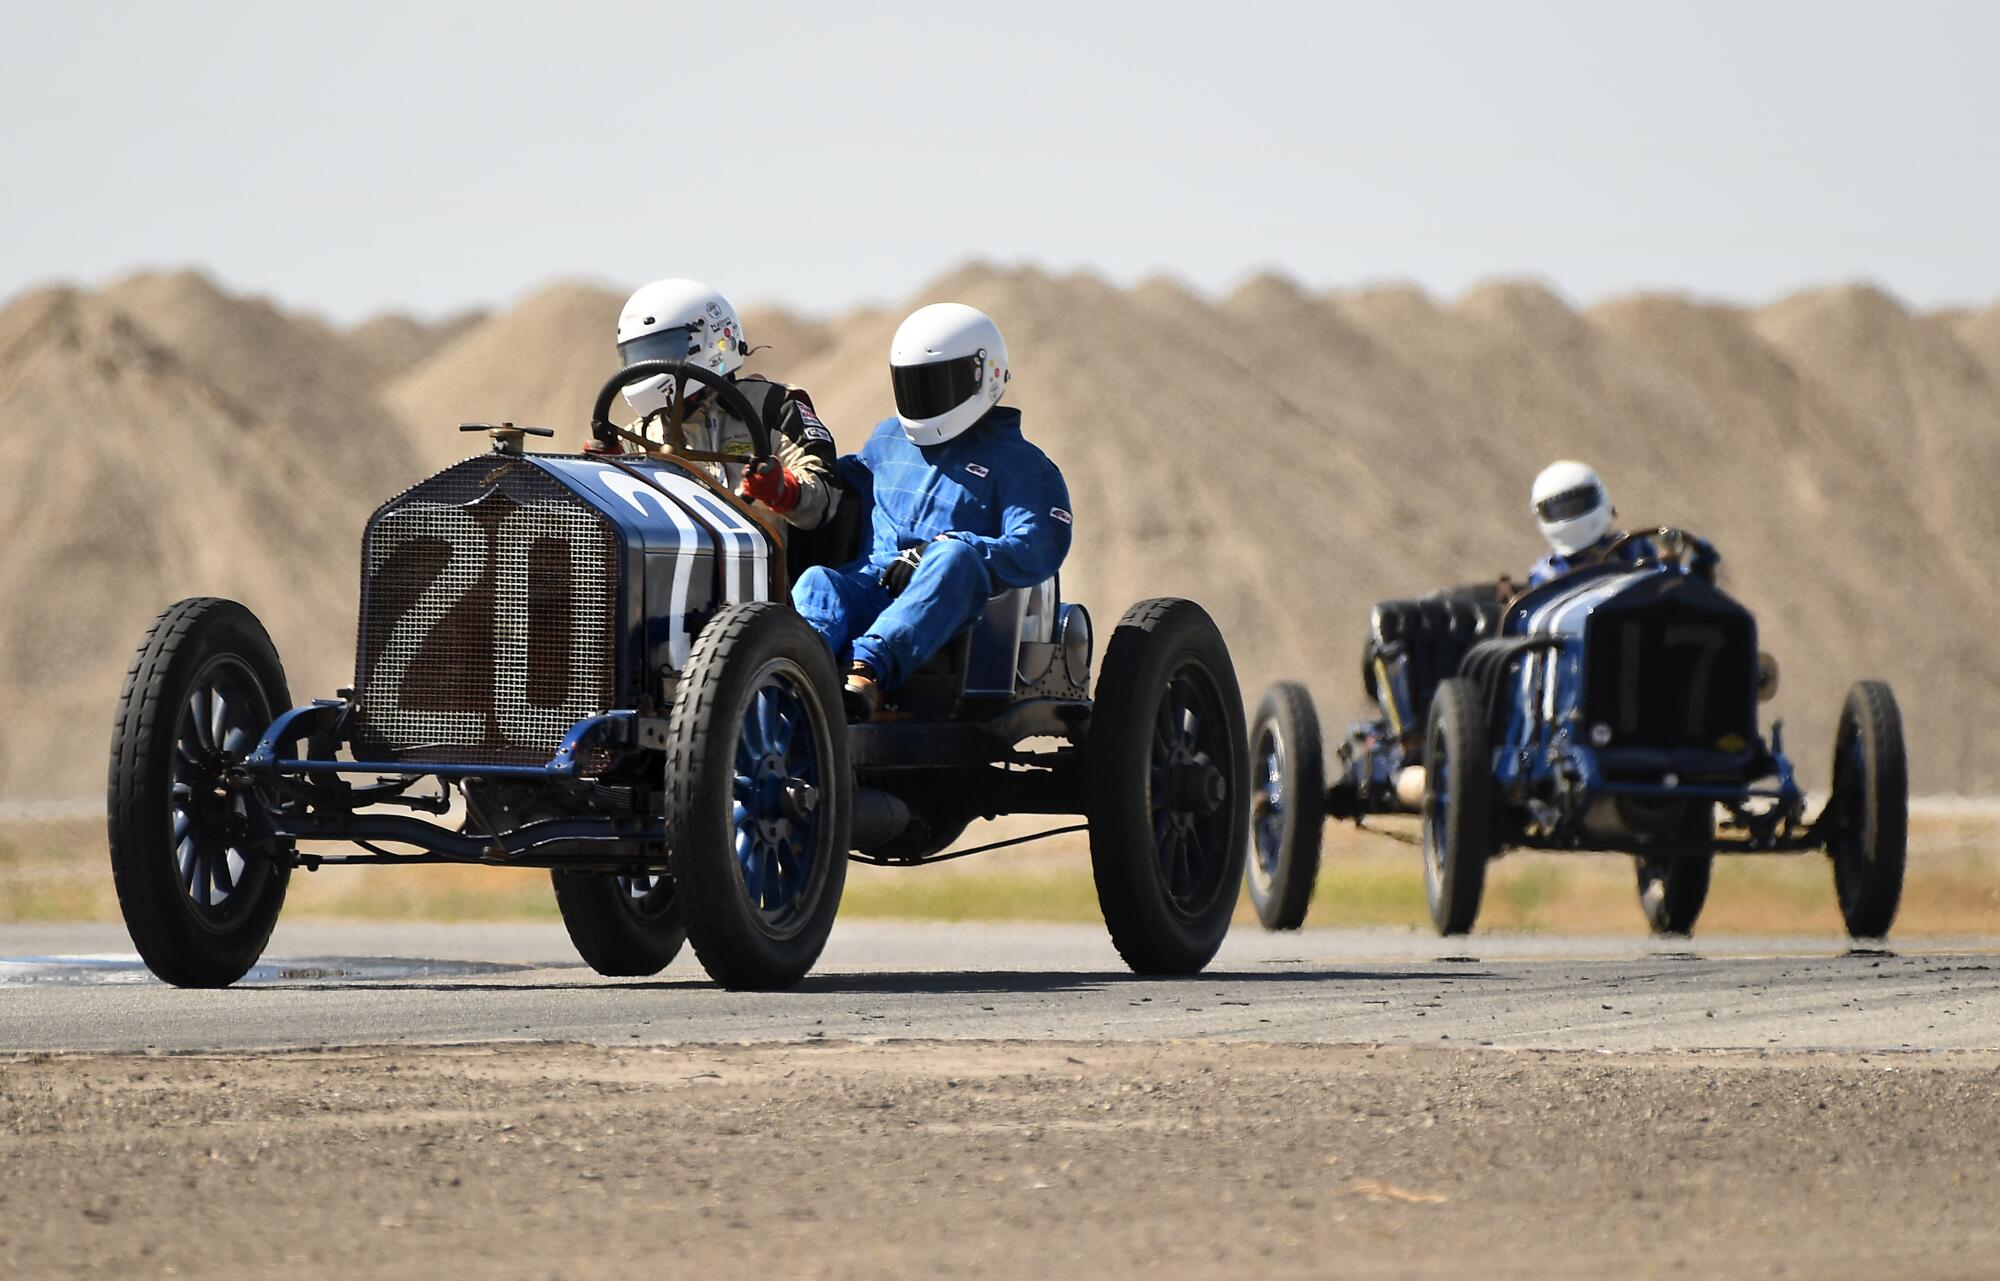 Vintage race cars make their way around the track at Buttonwillow Raceway in Buttonwillow, Calif., on Saturday.